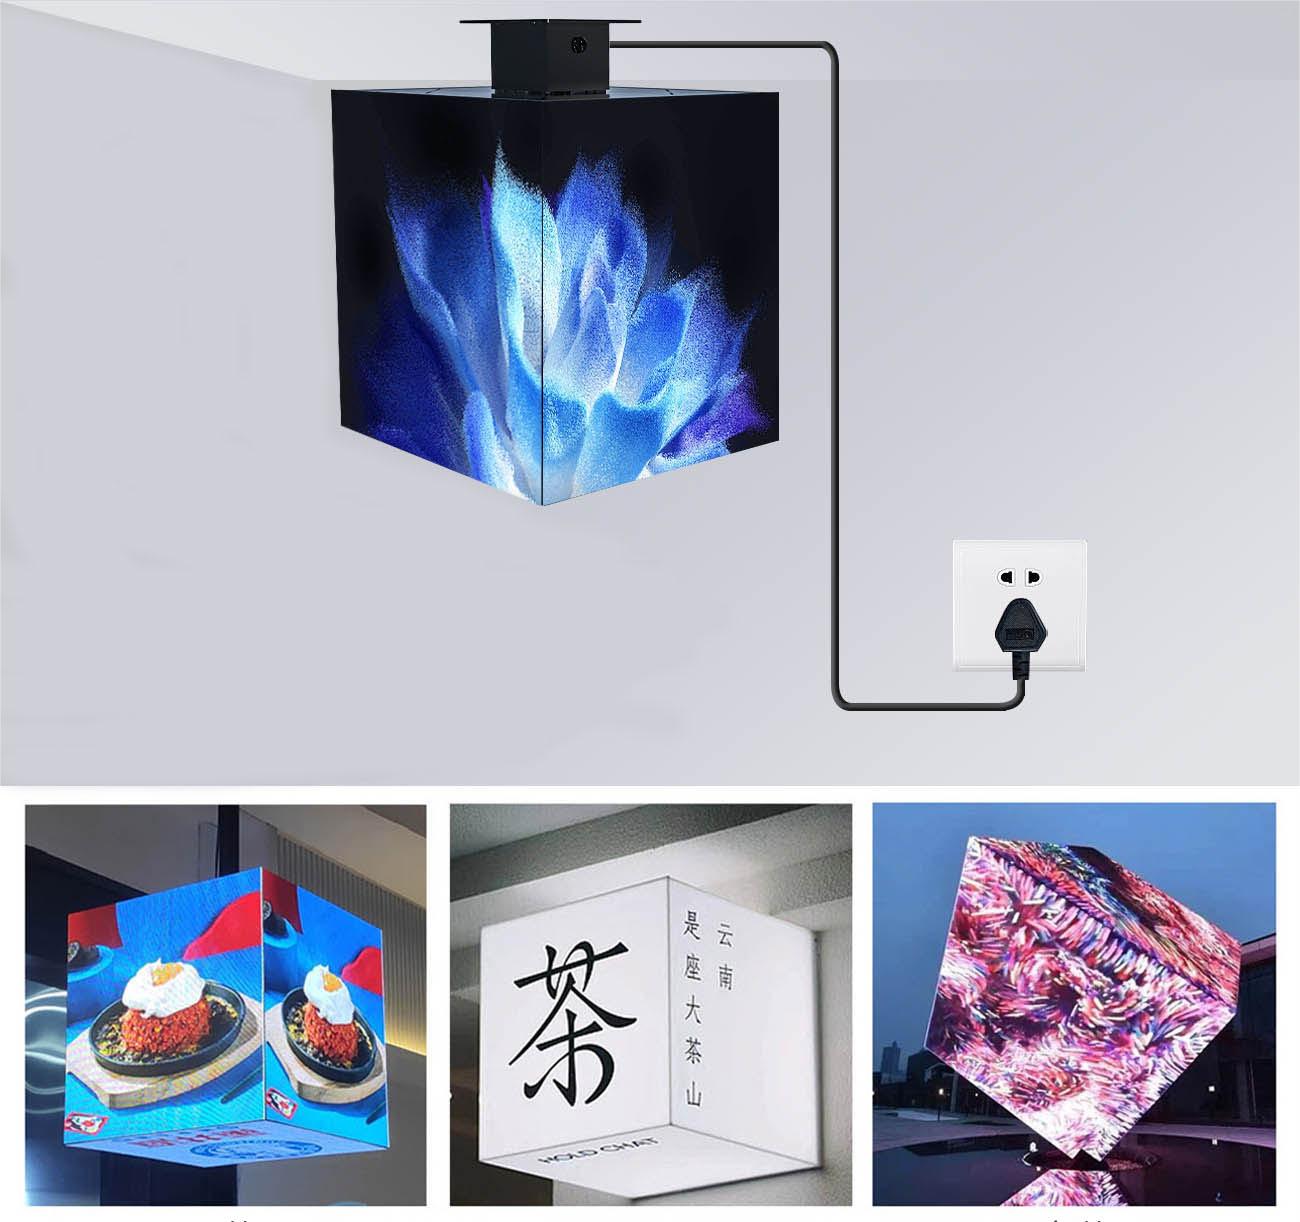 https://www.xygledscreen.com/store-magic-cube-led-display-indoor-outdoor-intelligent-lightbox-attracts-customer-traffic-product/